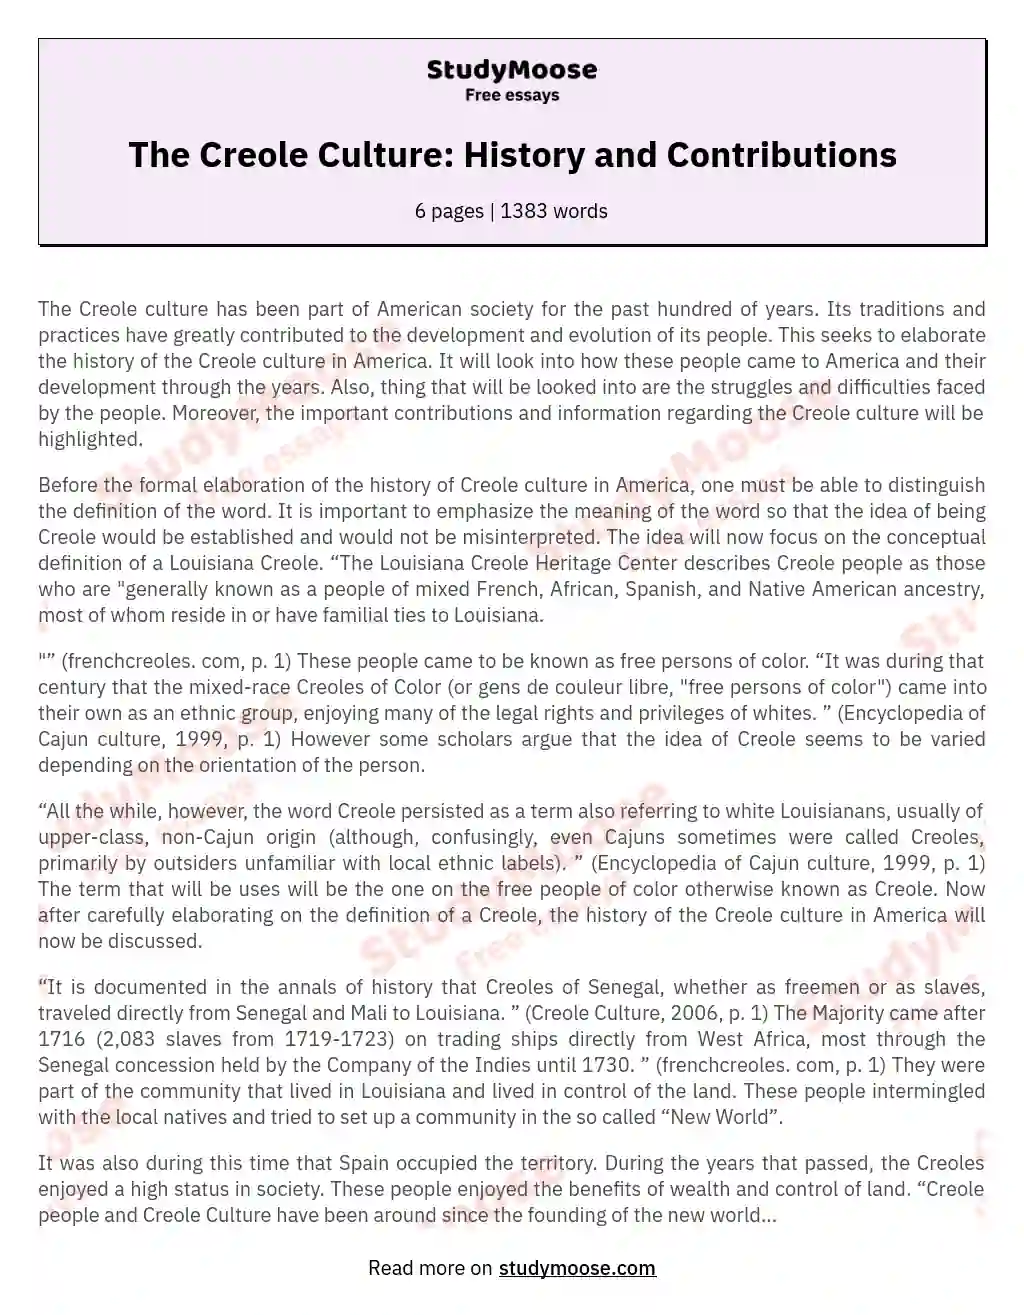 The Creole Culture: History and Contributions essay